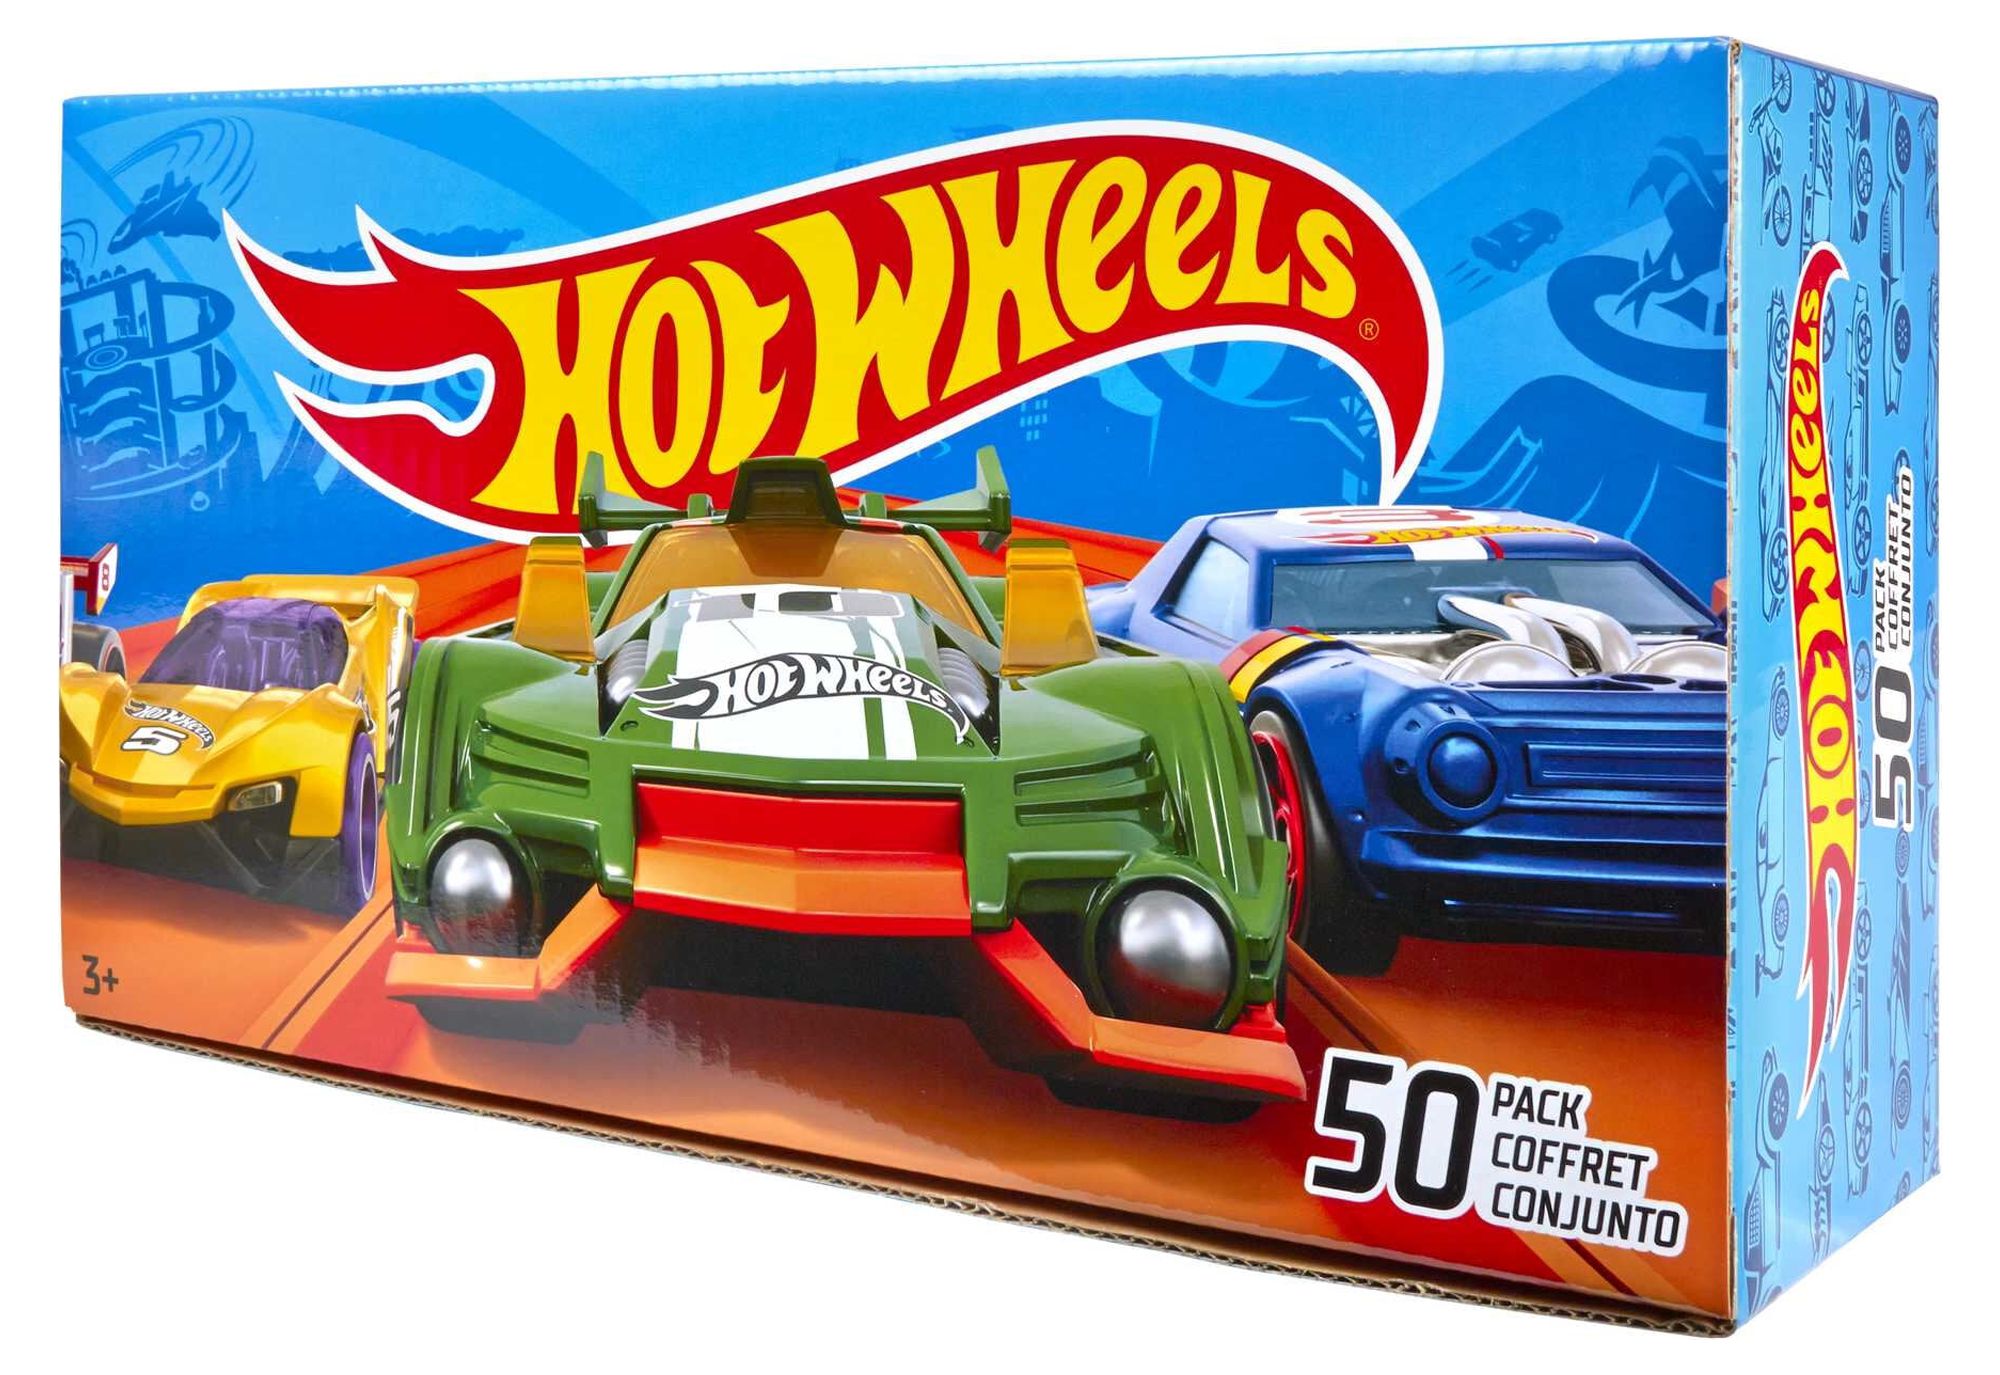 Hot Wheels Cars, Toy Trucks and Cars Individually Packaged, Set of 50 - image 7 of 7